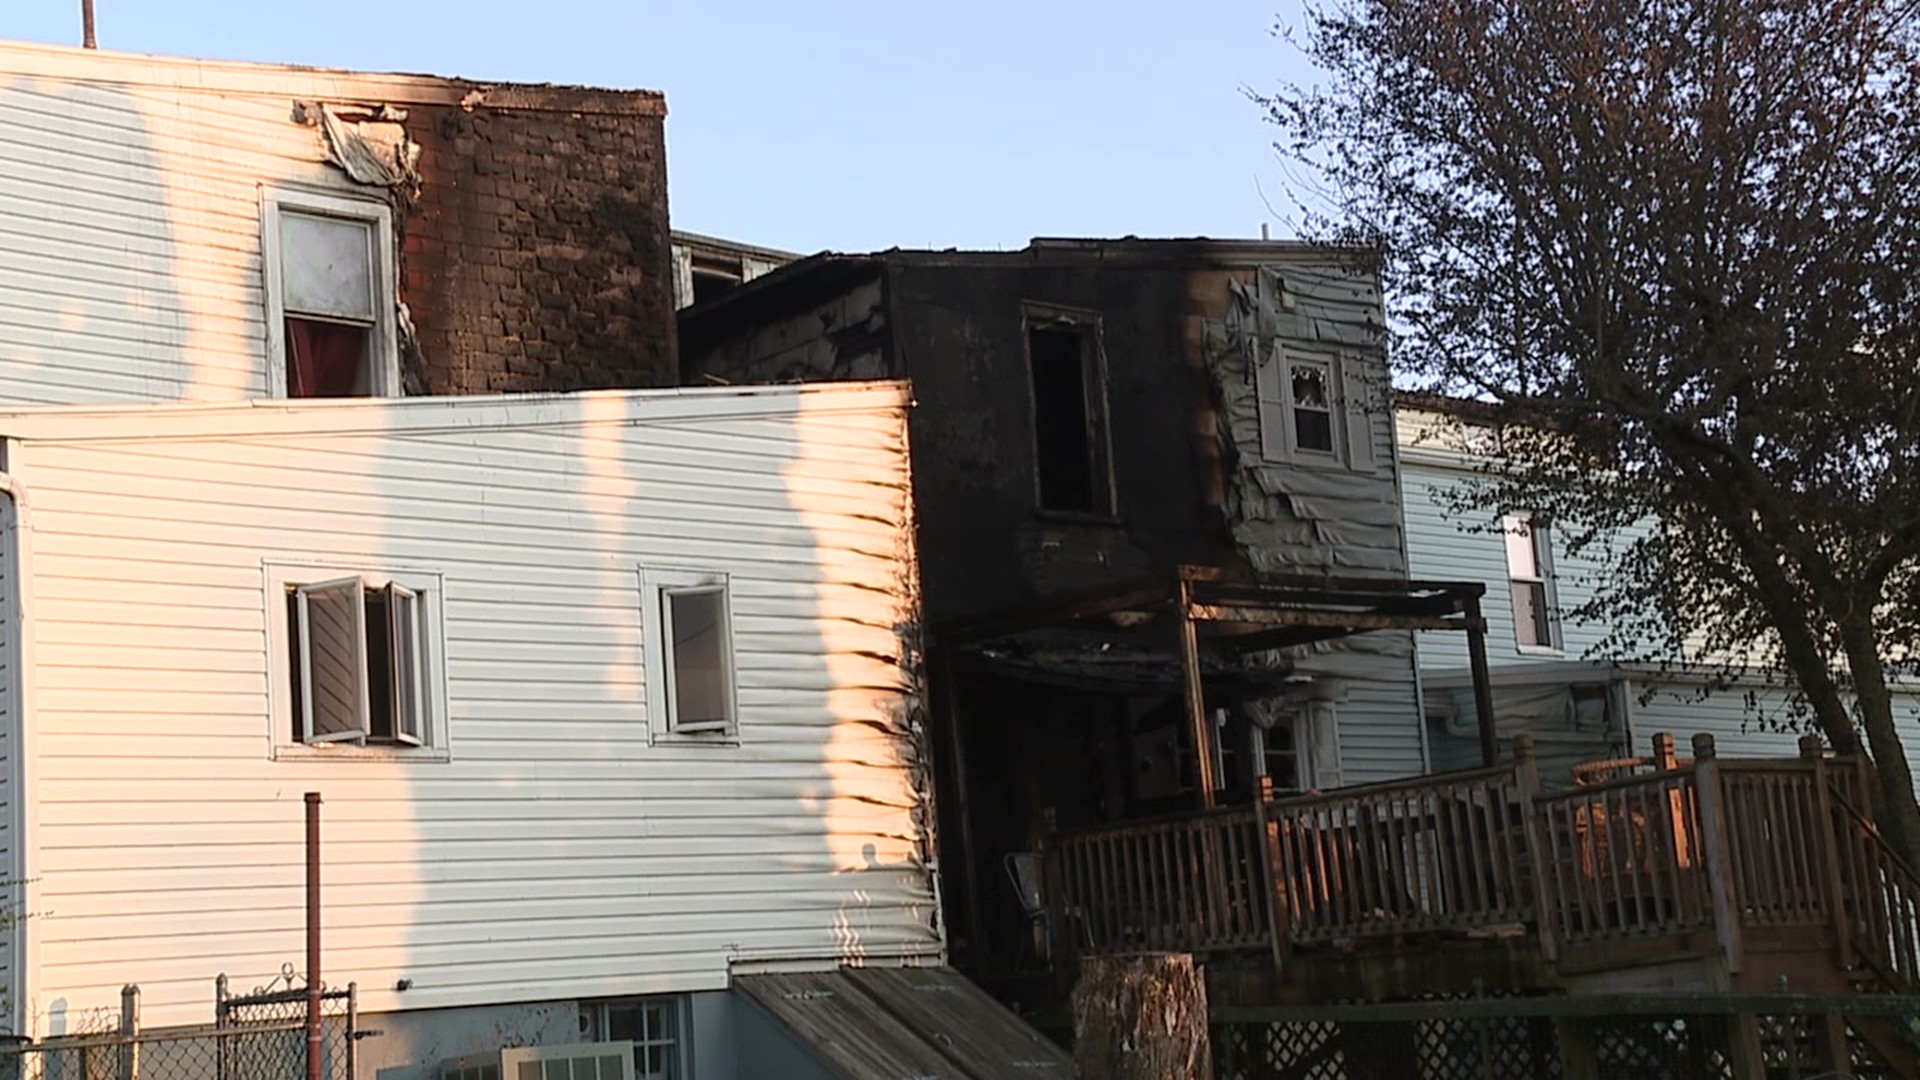 The blaze broke out around 5 p.m. on East Union Street in Schuylkill Haven.